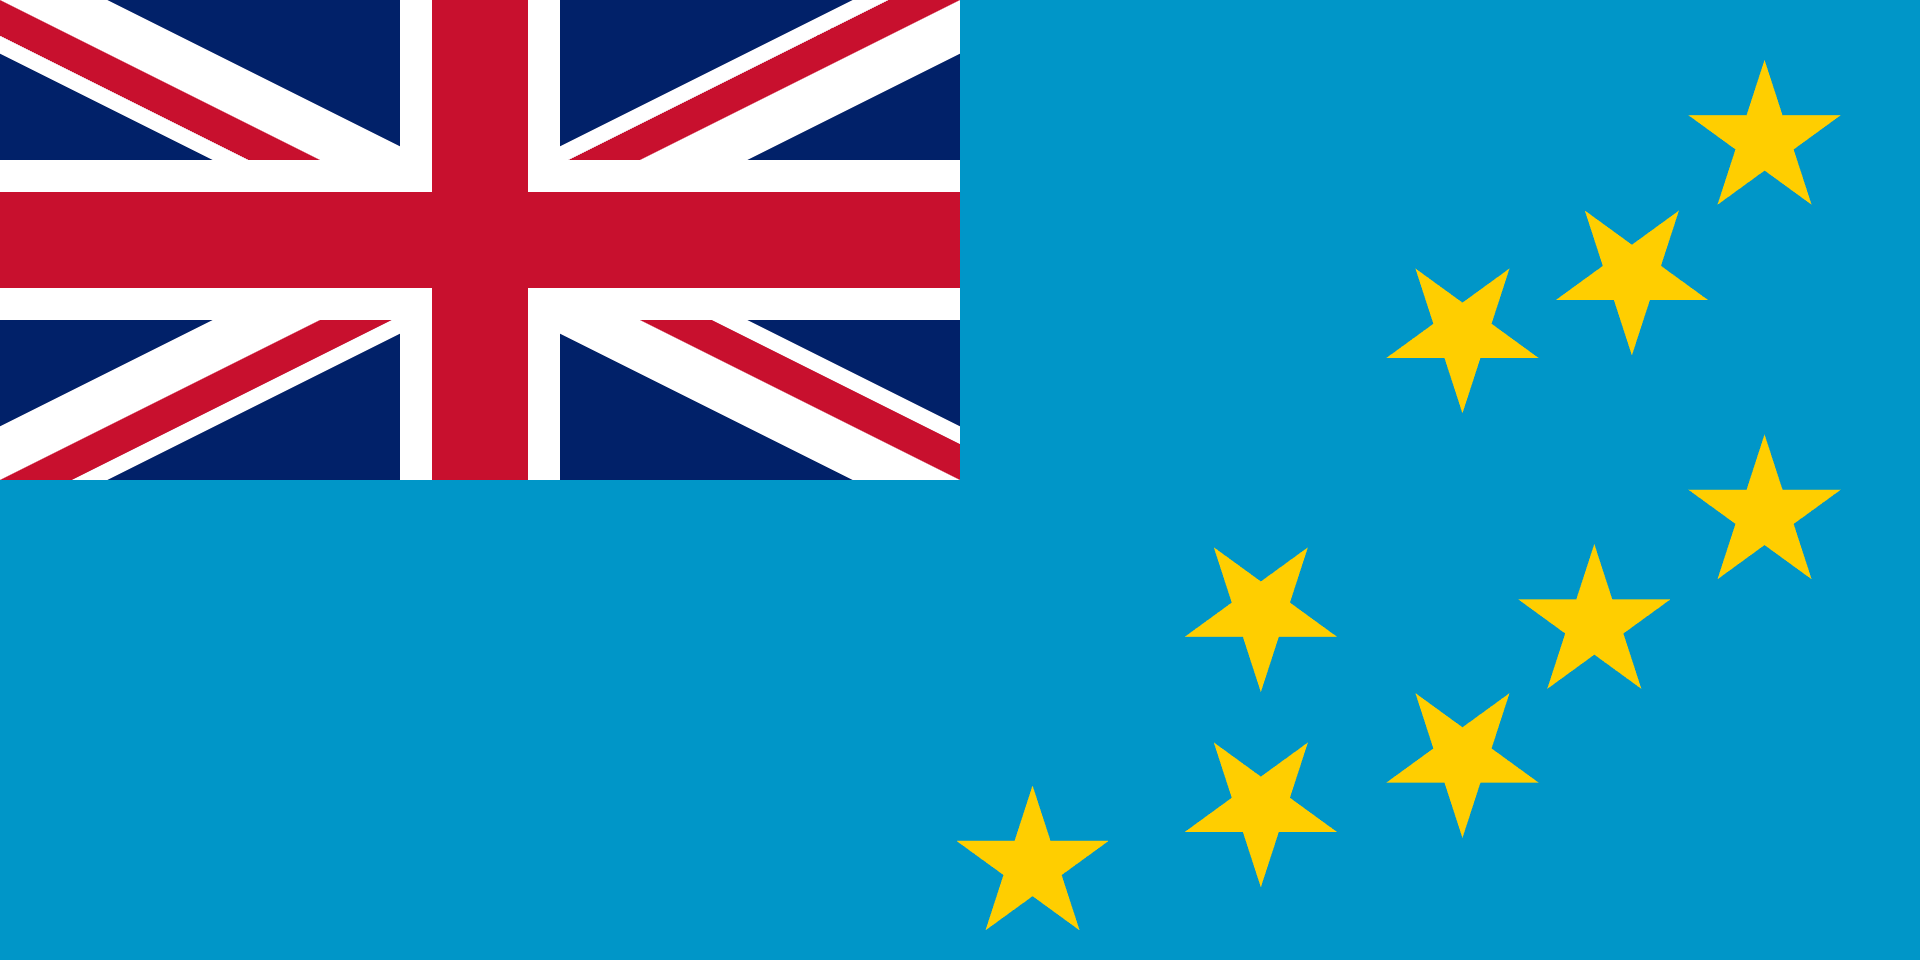 Facts of Tuvalu